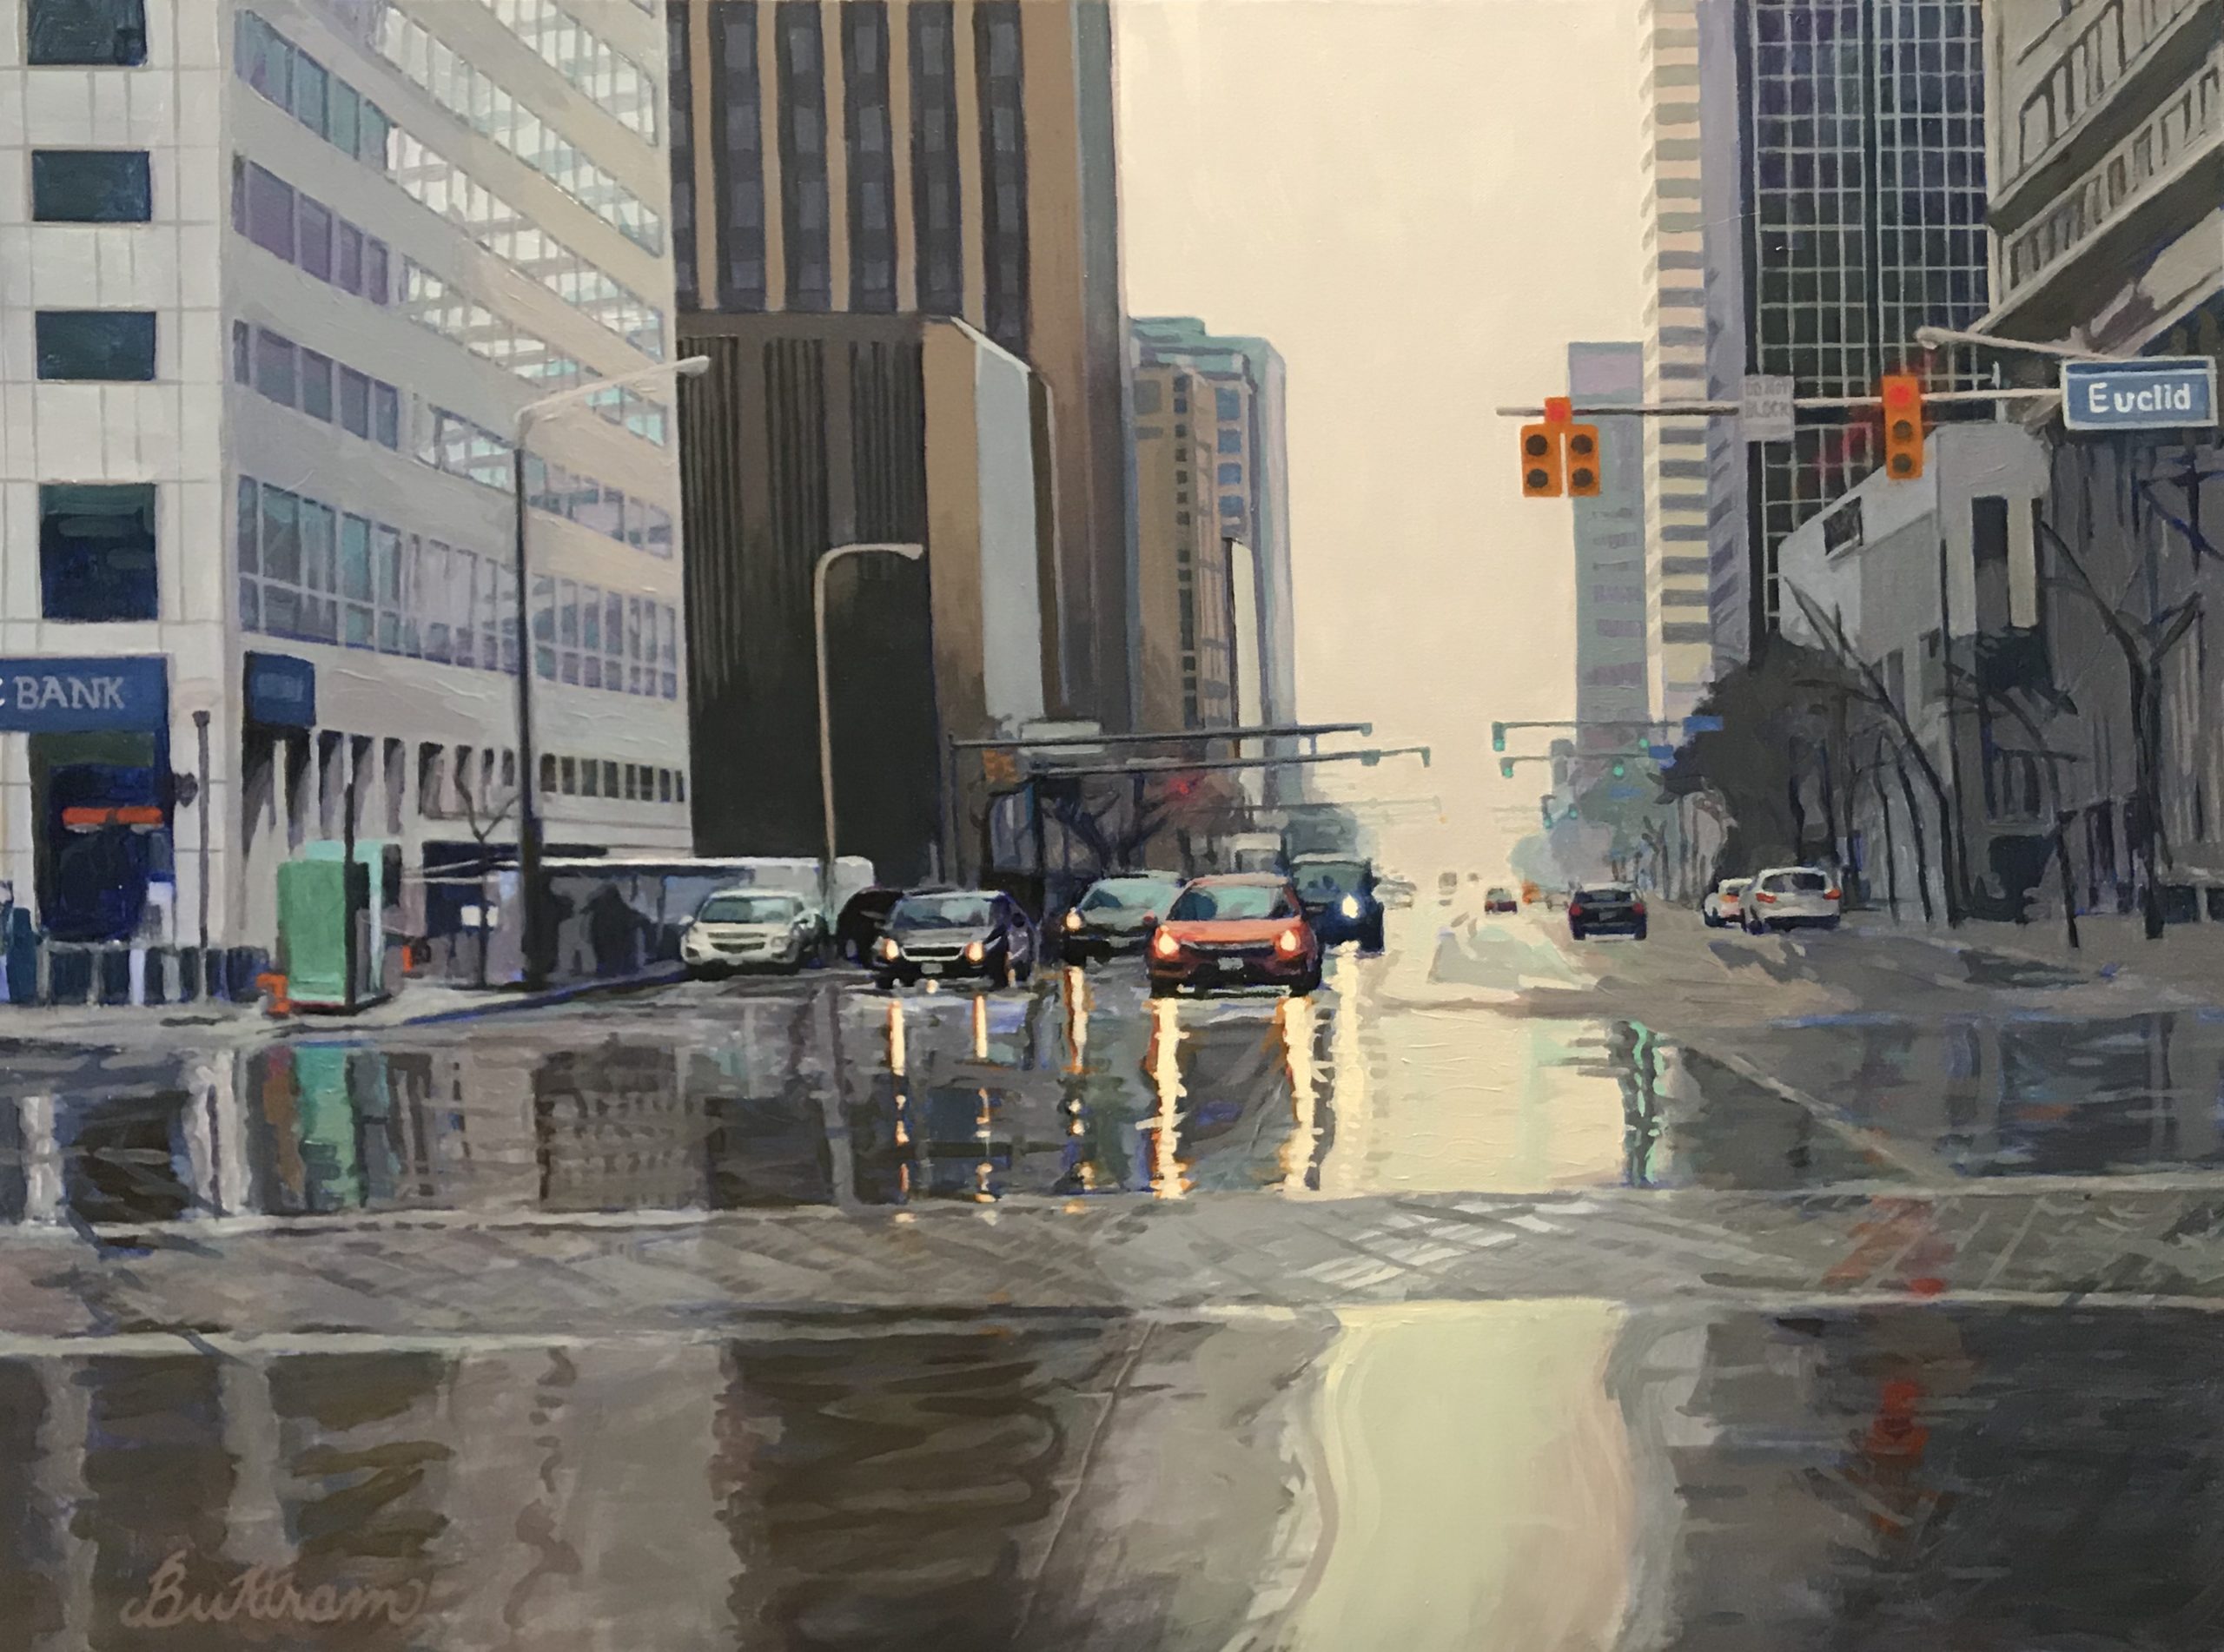 "Tall Buildings, Wet Road" by David Buttram